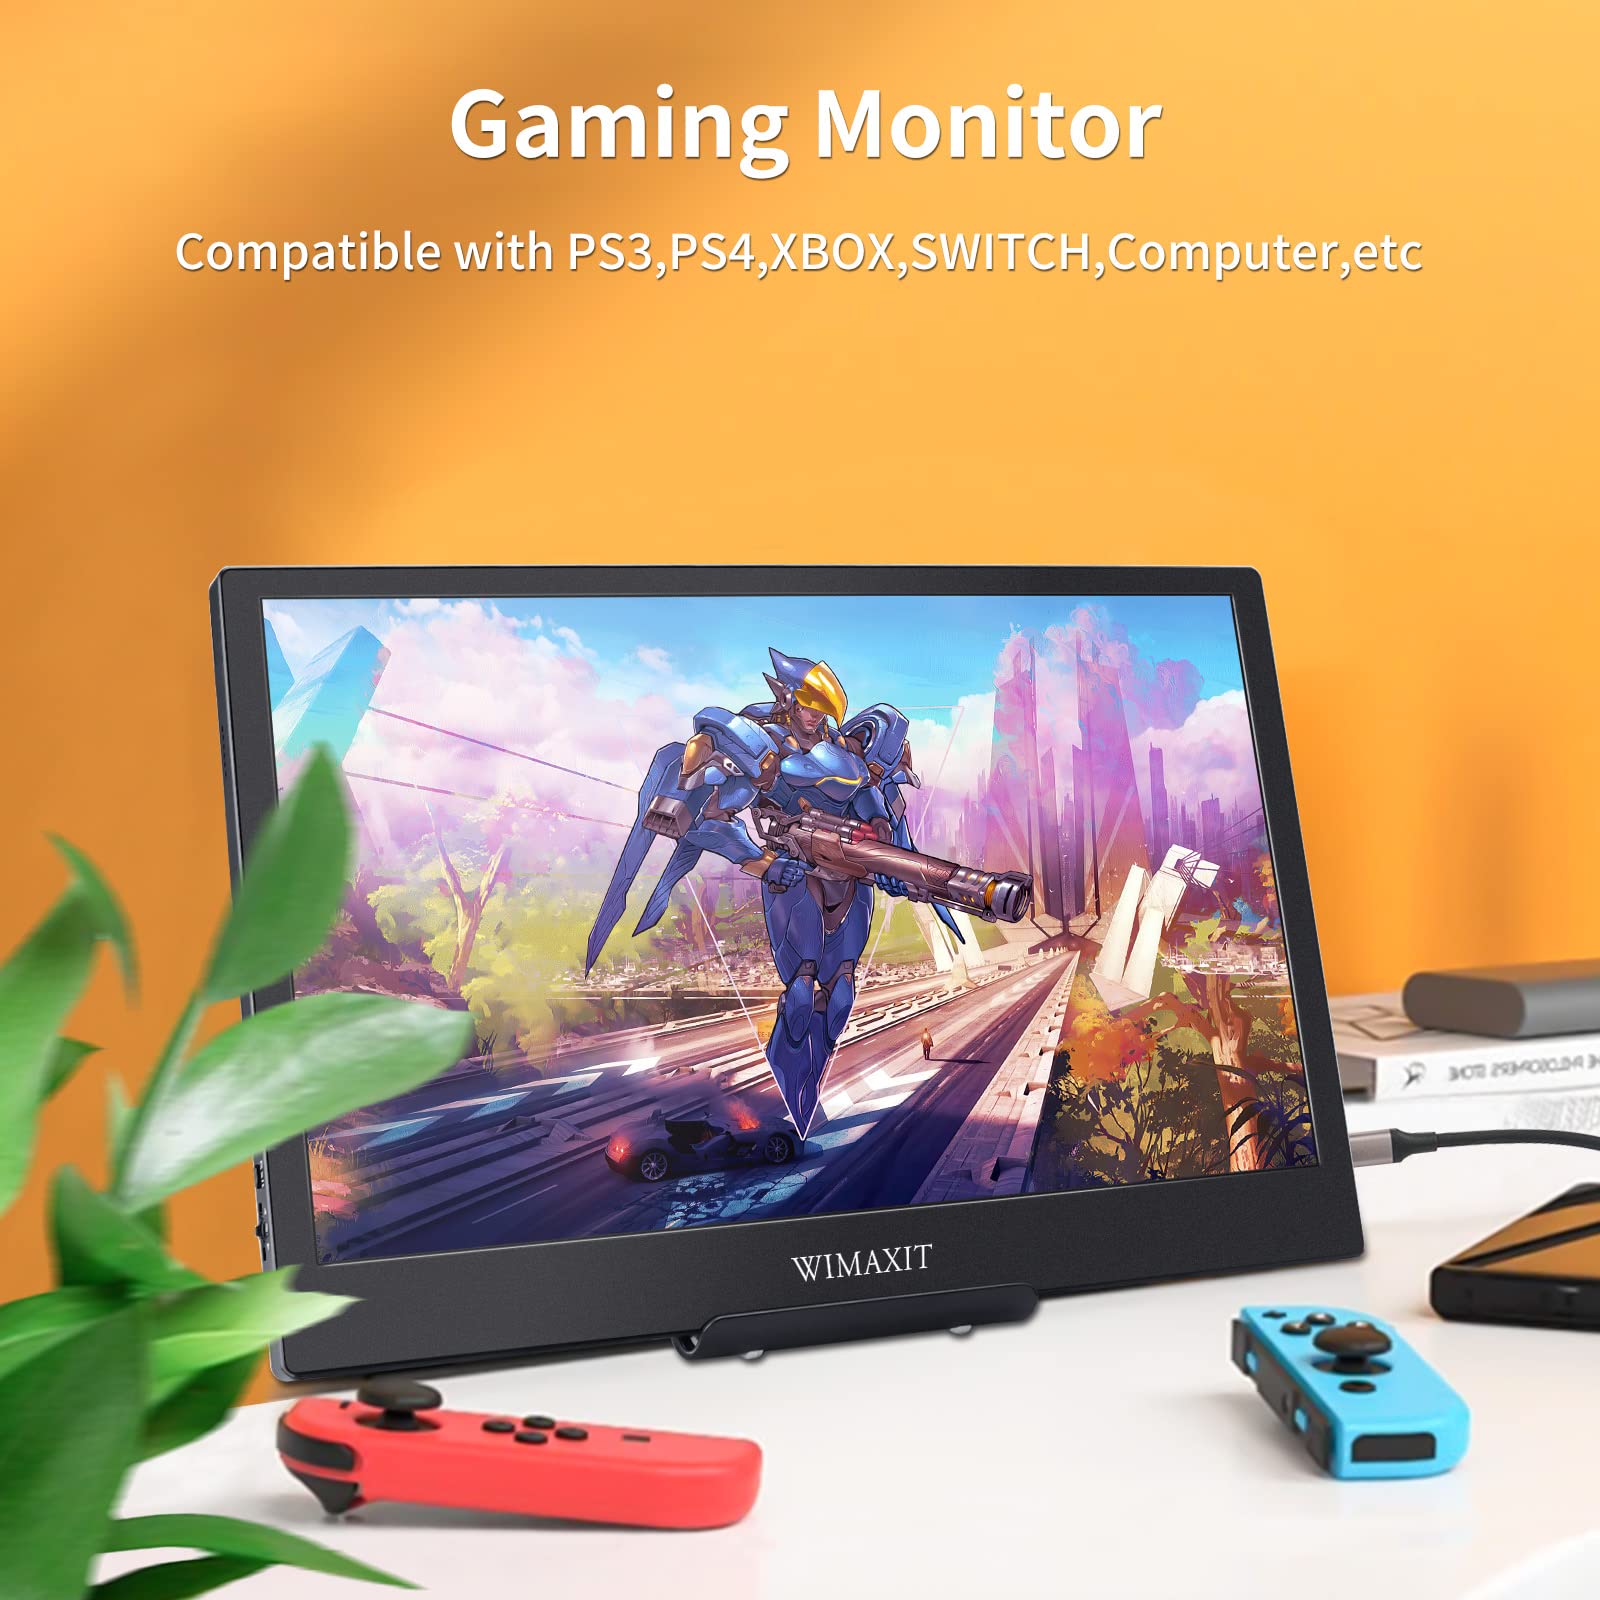 WIMAXIT 12inch Portable Monitor Dual USB Type-C Touchscreen IPS Display with 1366x768 Mini HDMI USB-C Speakers for Laptop PC Computer PS4 Xbox Phone